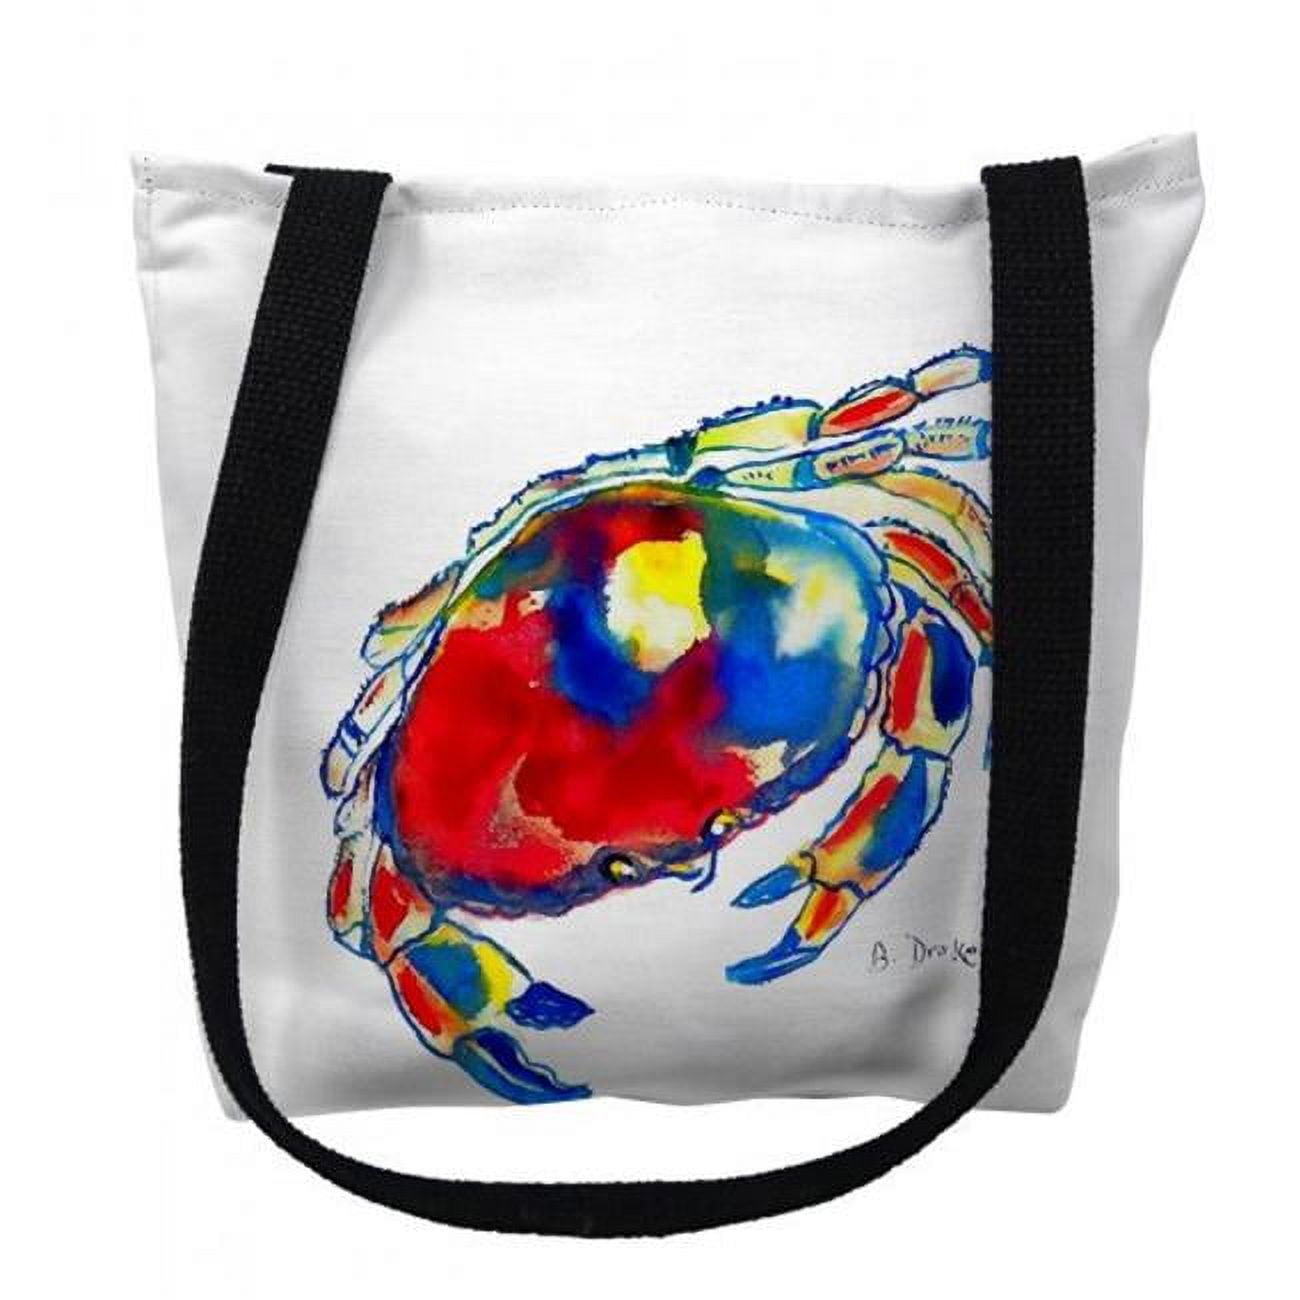 Ty103m 16 X 16 In. Dungeness Crab Tote Bag - Medium